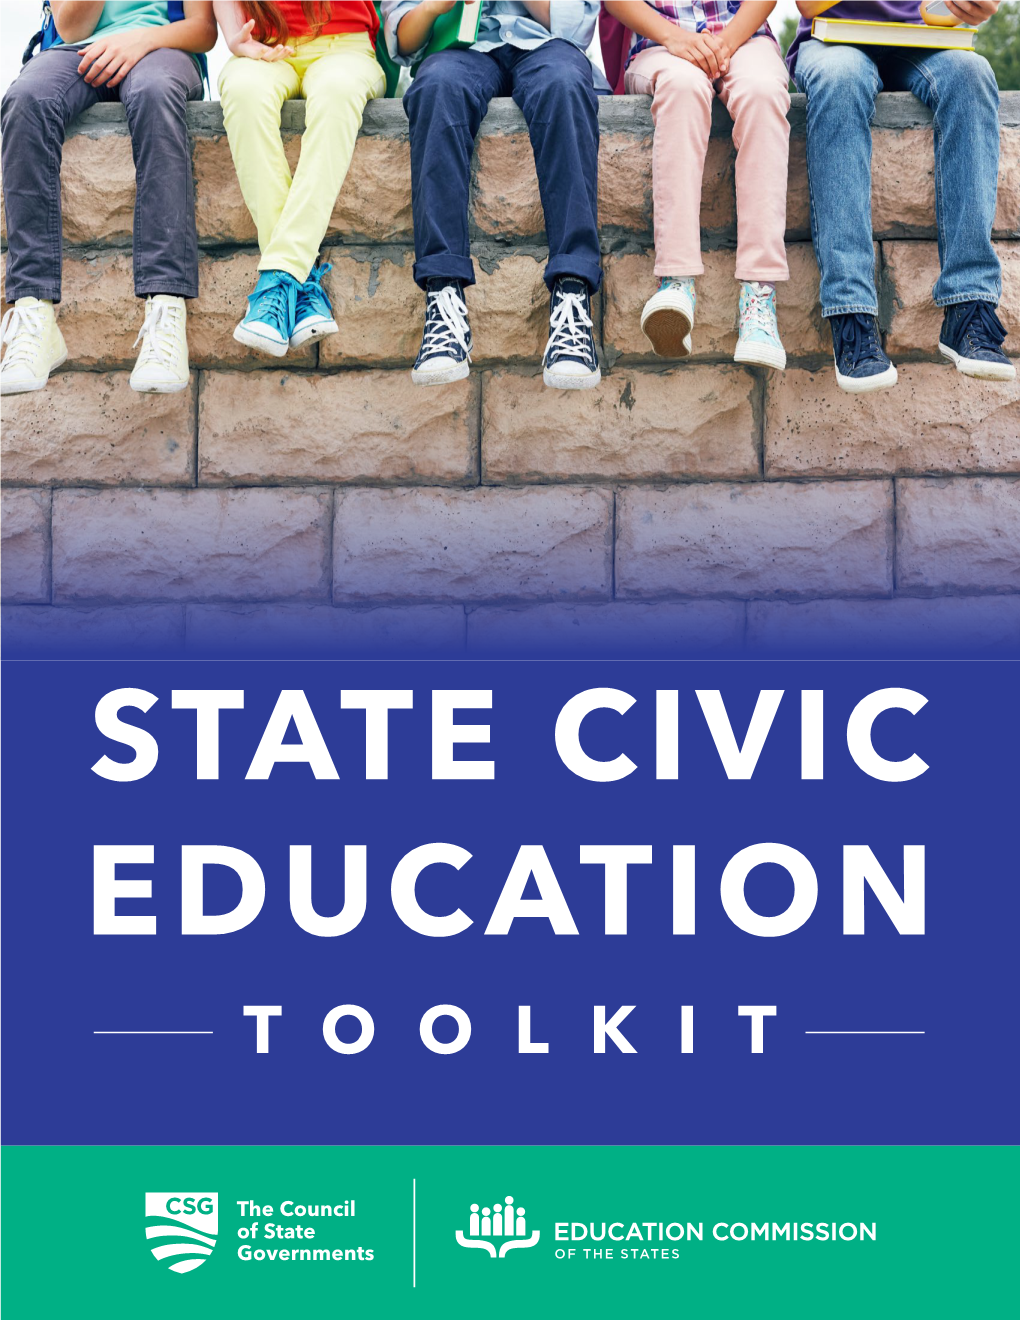 STATE CIVIC EDUCATION TOOLKIT December 2017